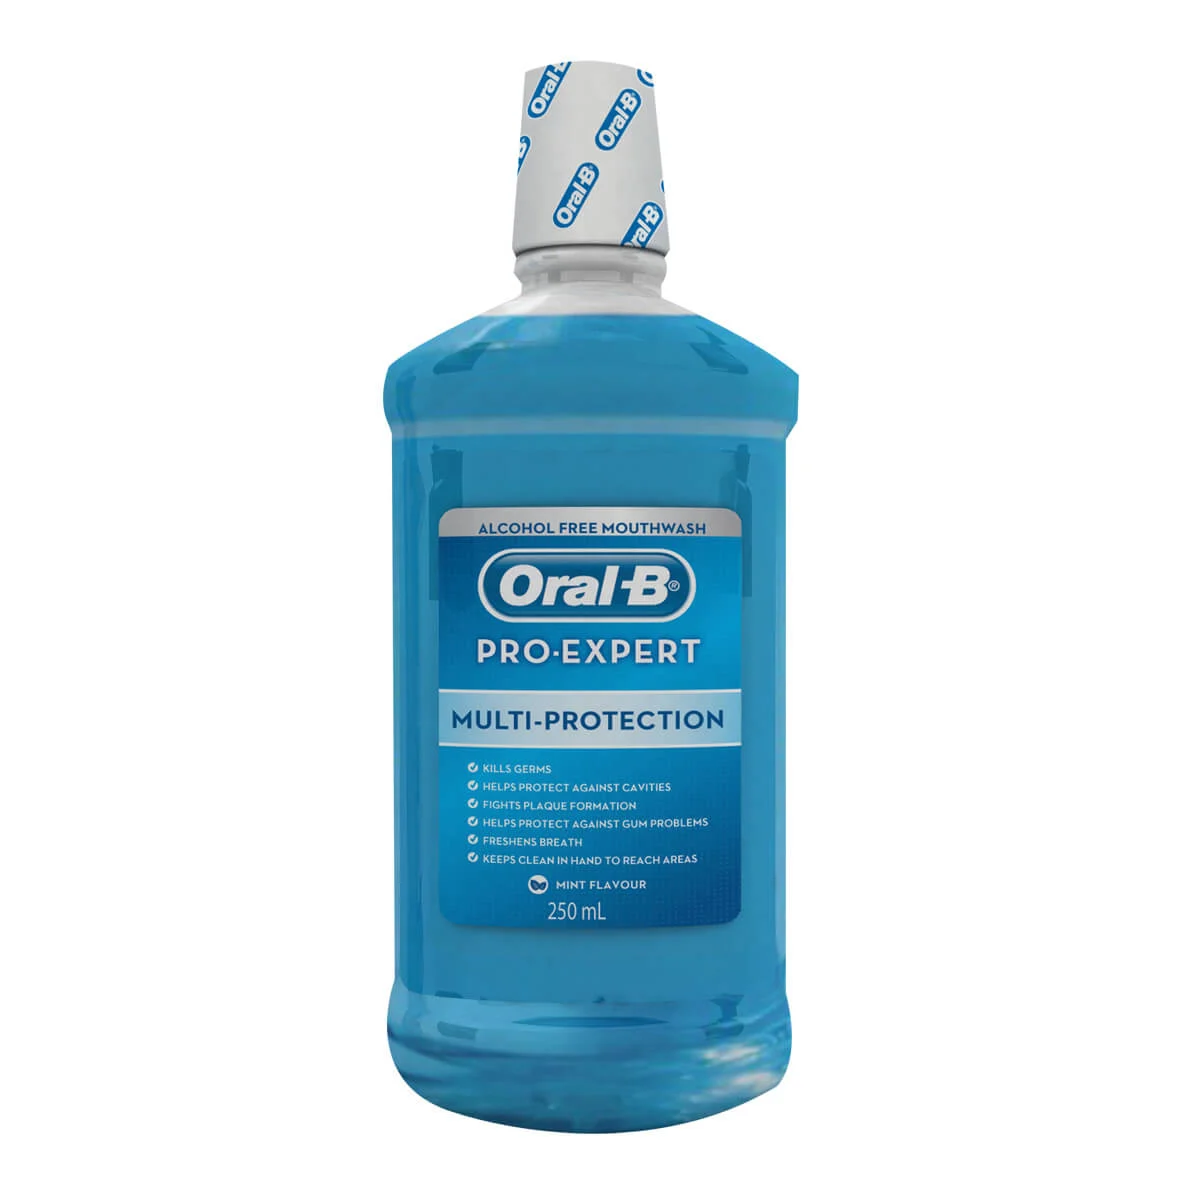 Oral-B Pro-Expert Multi-Protection Mouthwash 